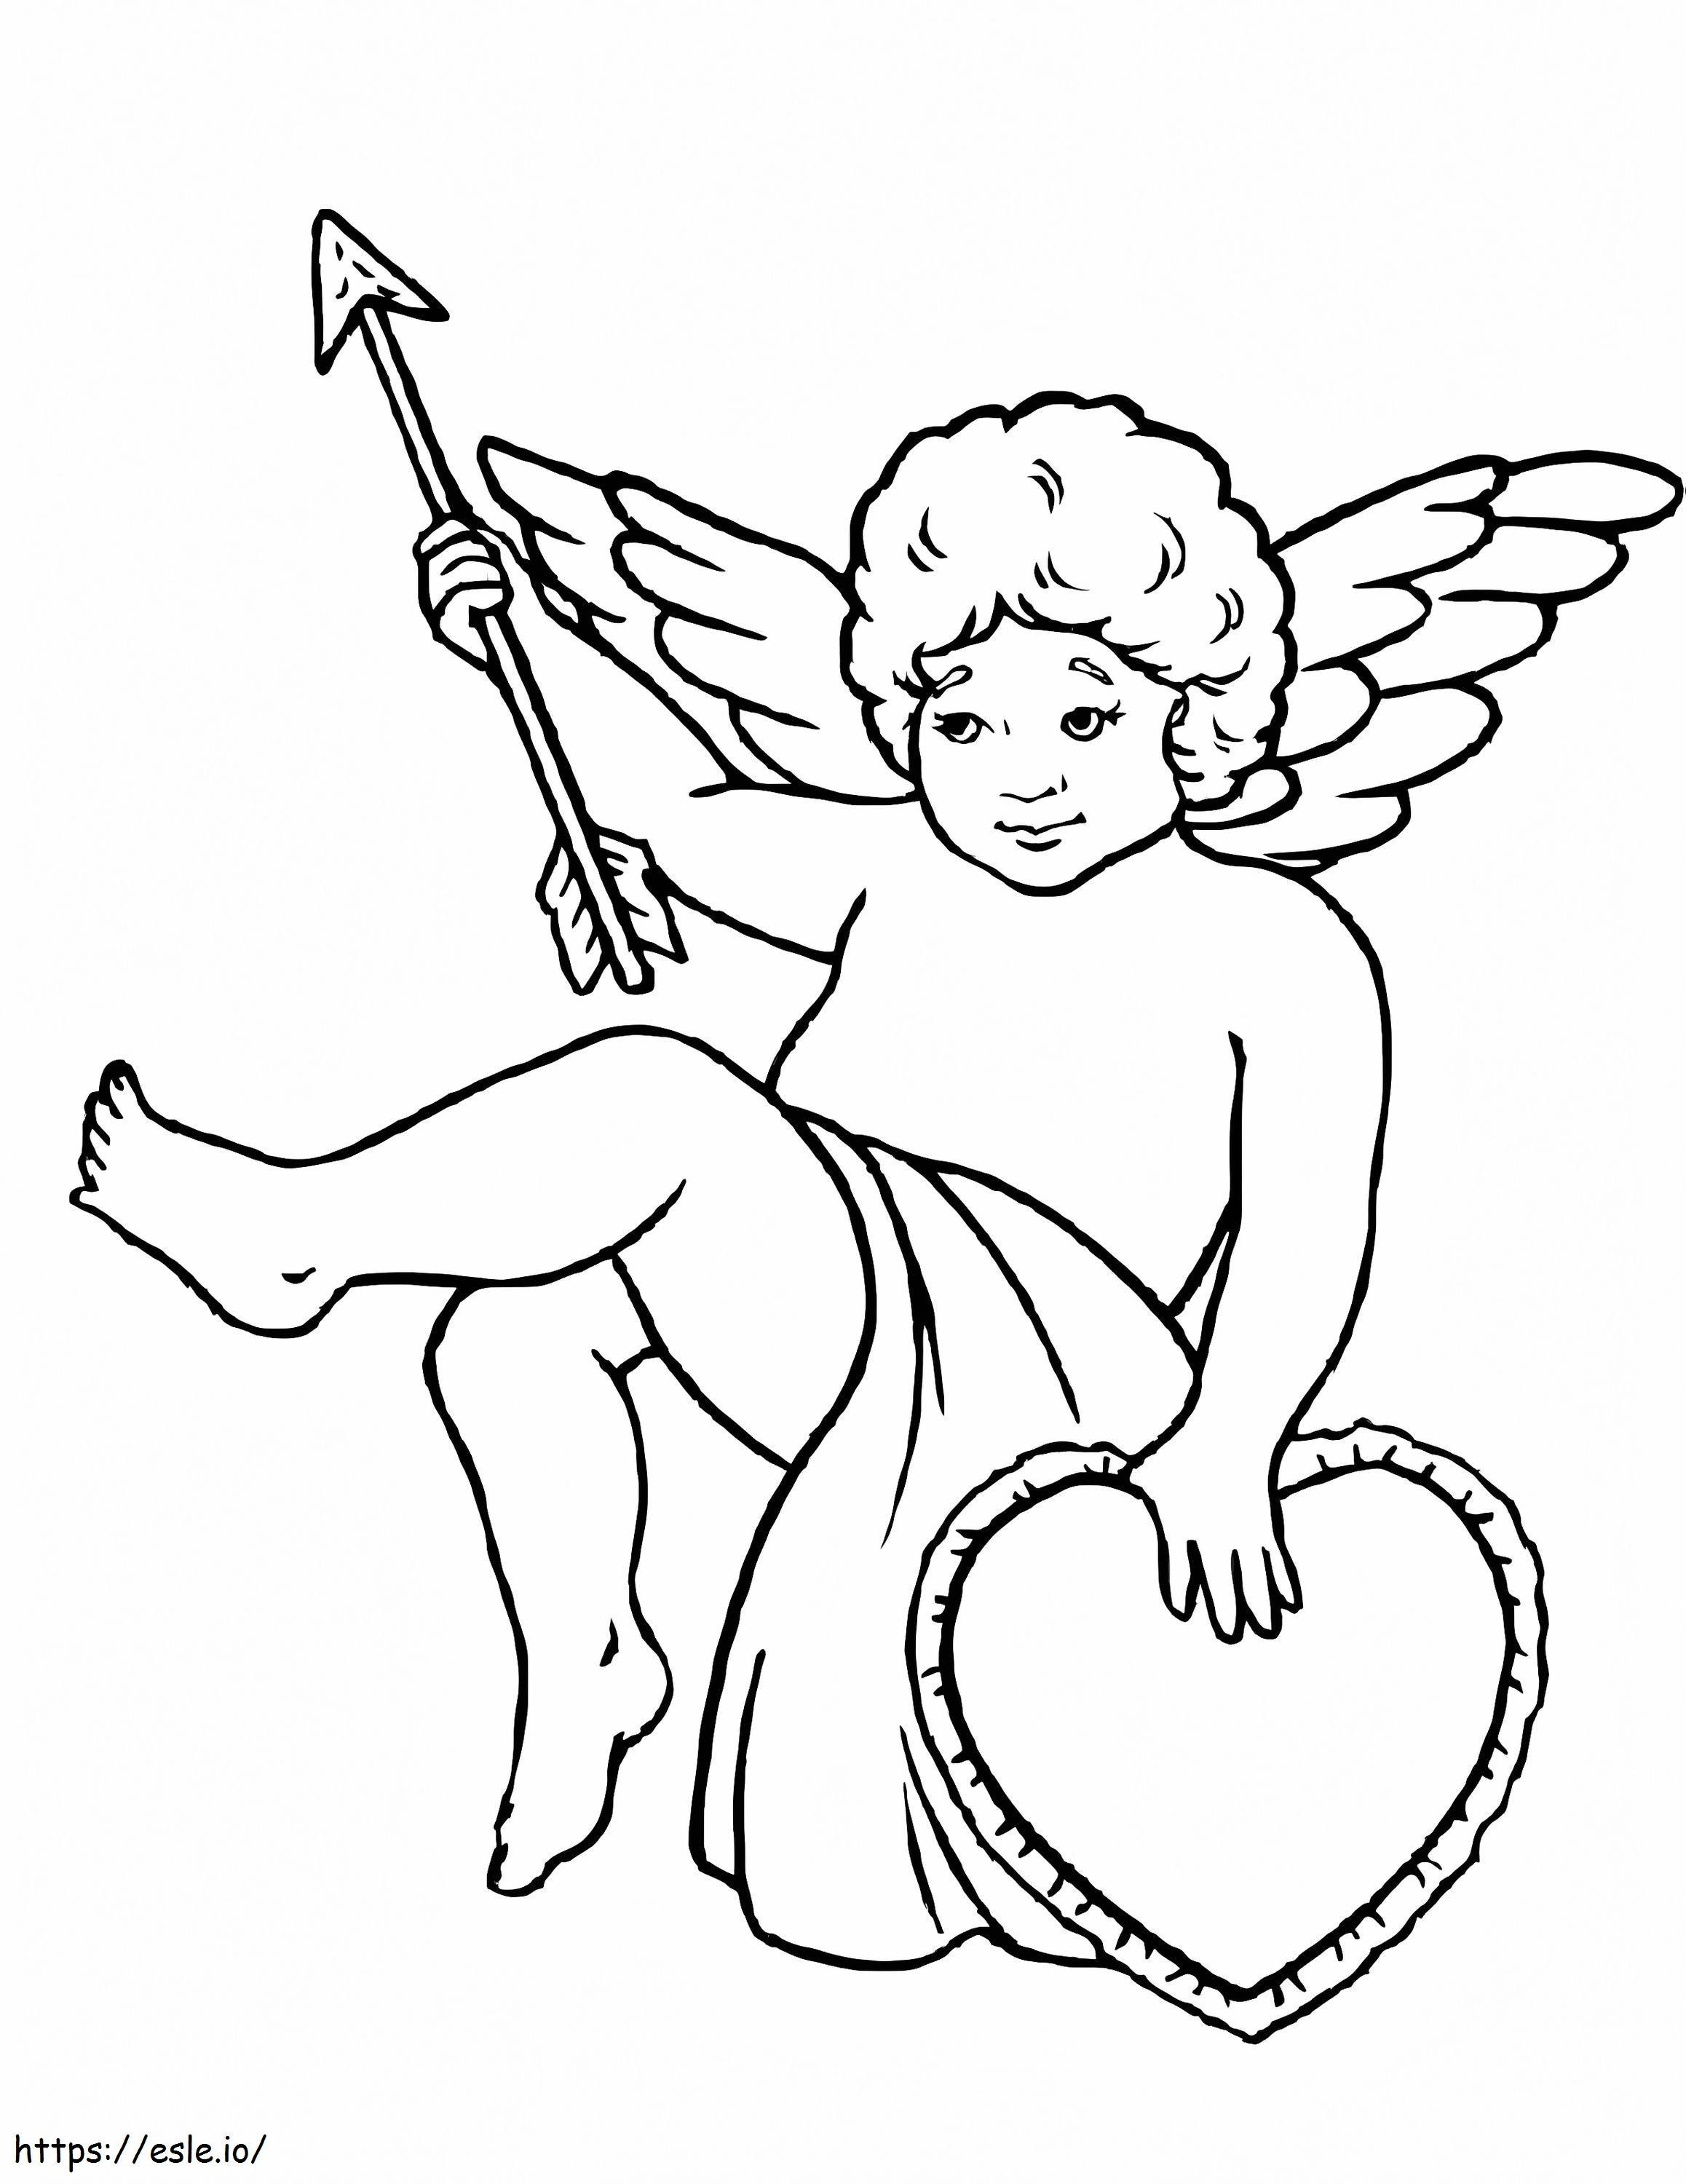 Cupid 1 coloring page